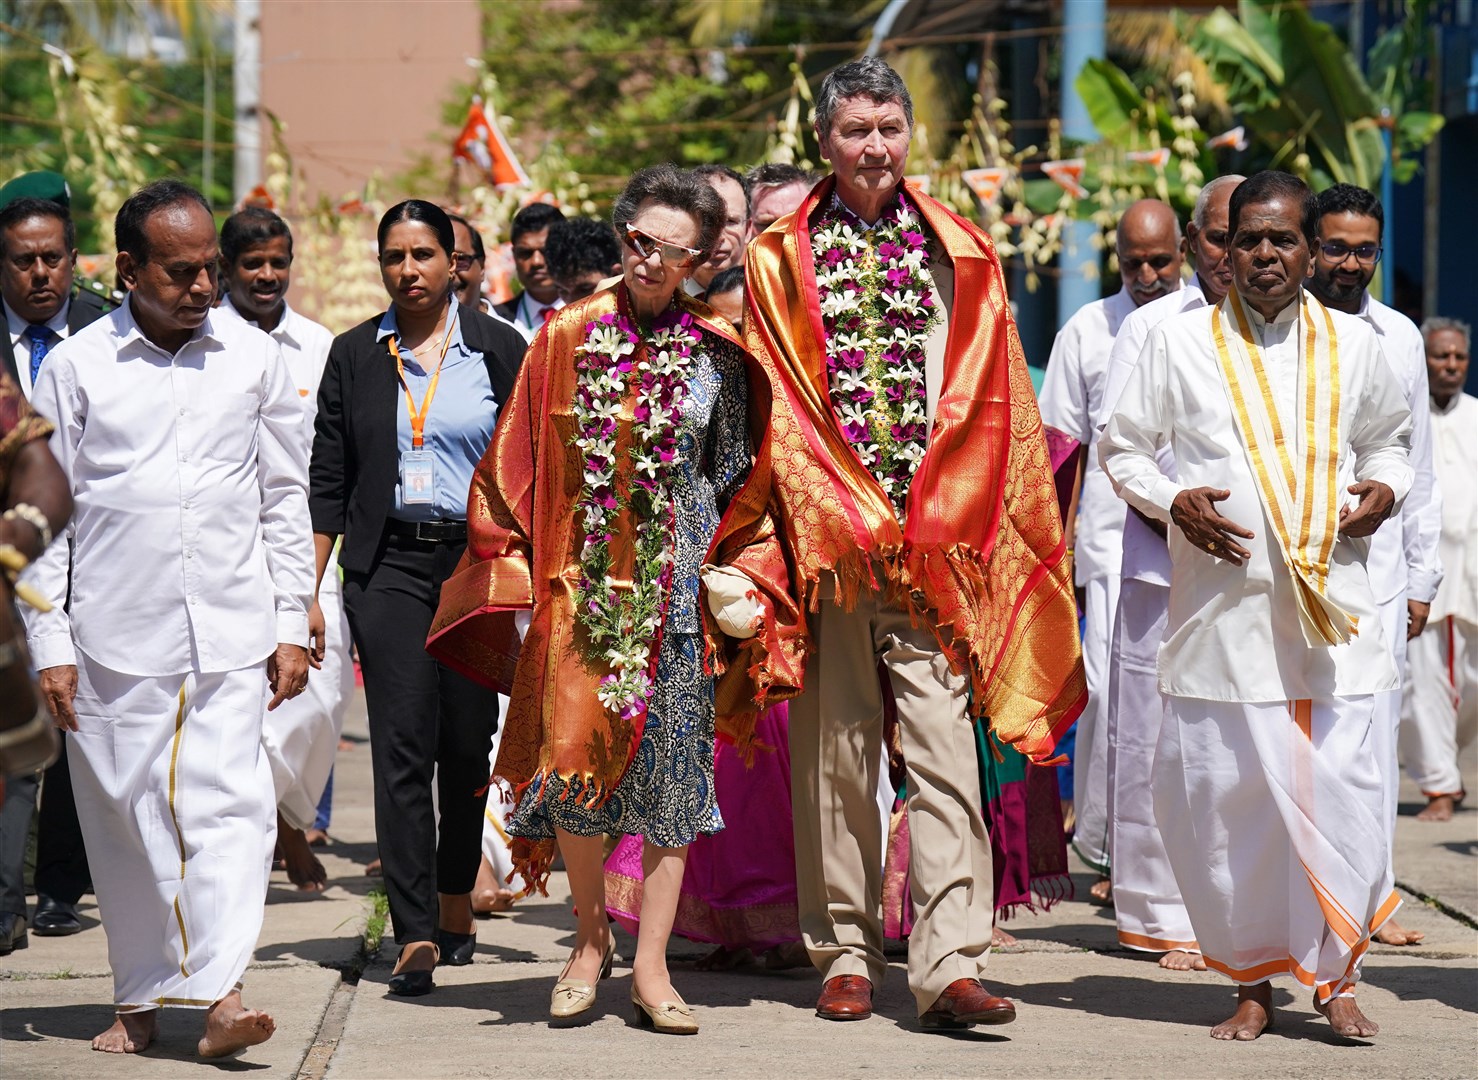 The Princess Royal and her husband Vice Admiral Sir Timothy Laurence during a visit to Vajira Pillayar Kovil Hindu temple in Colombo, Sri Lanka, on day three of their visit to the country (Jonathan Brady/PA)